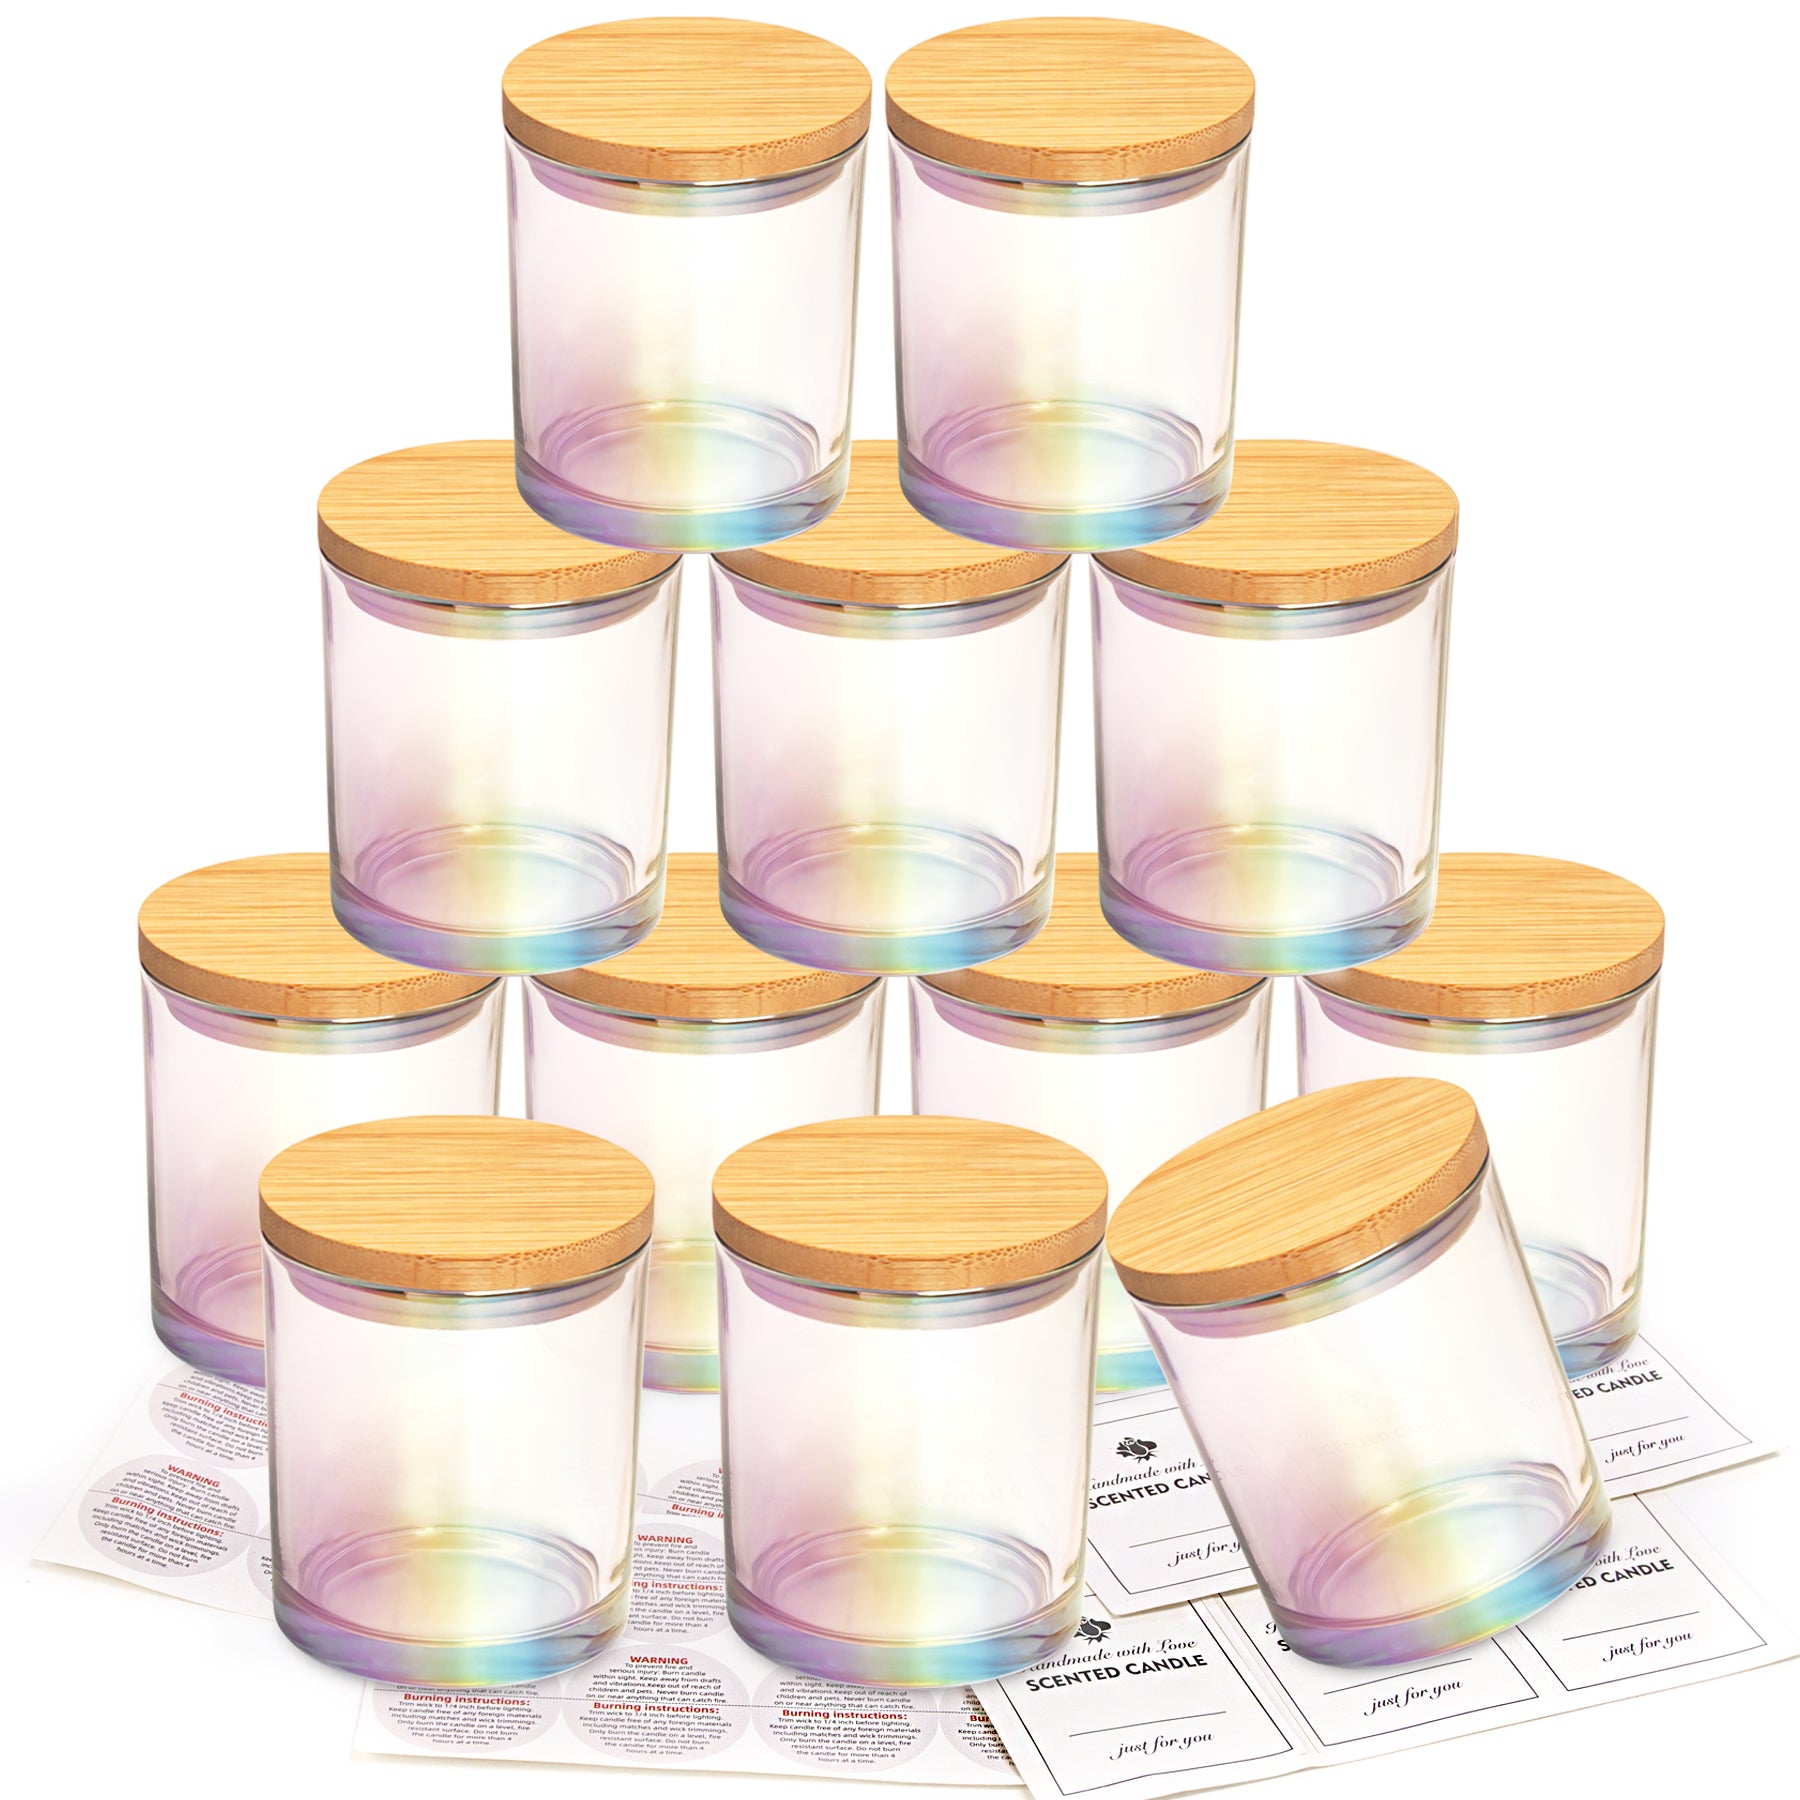 Large 20 oz Clear Glass Candle Jar with Airtight Glass Lid+ Labels